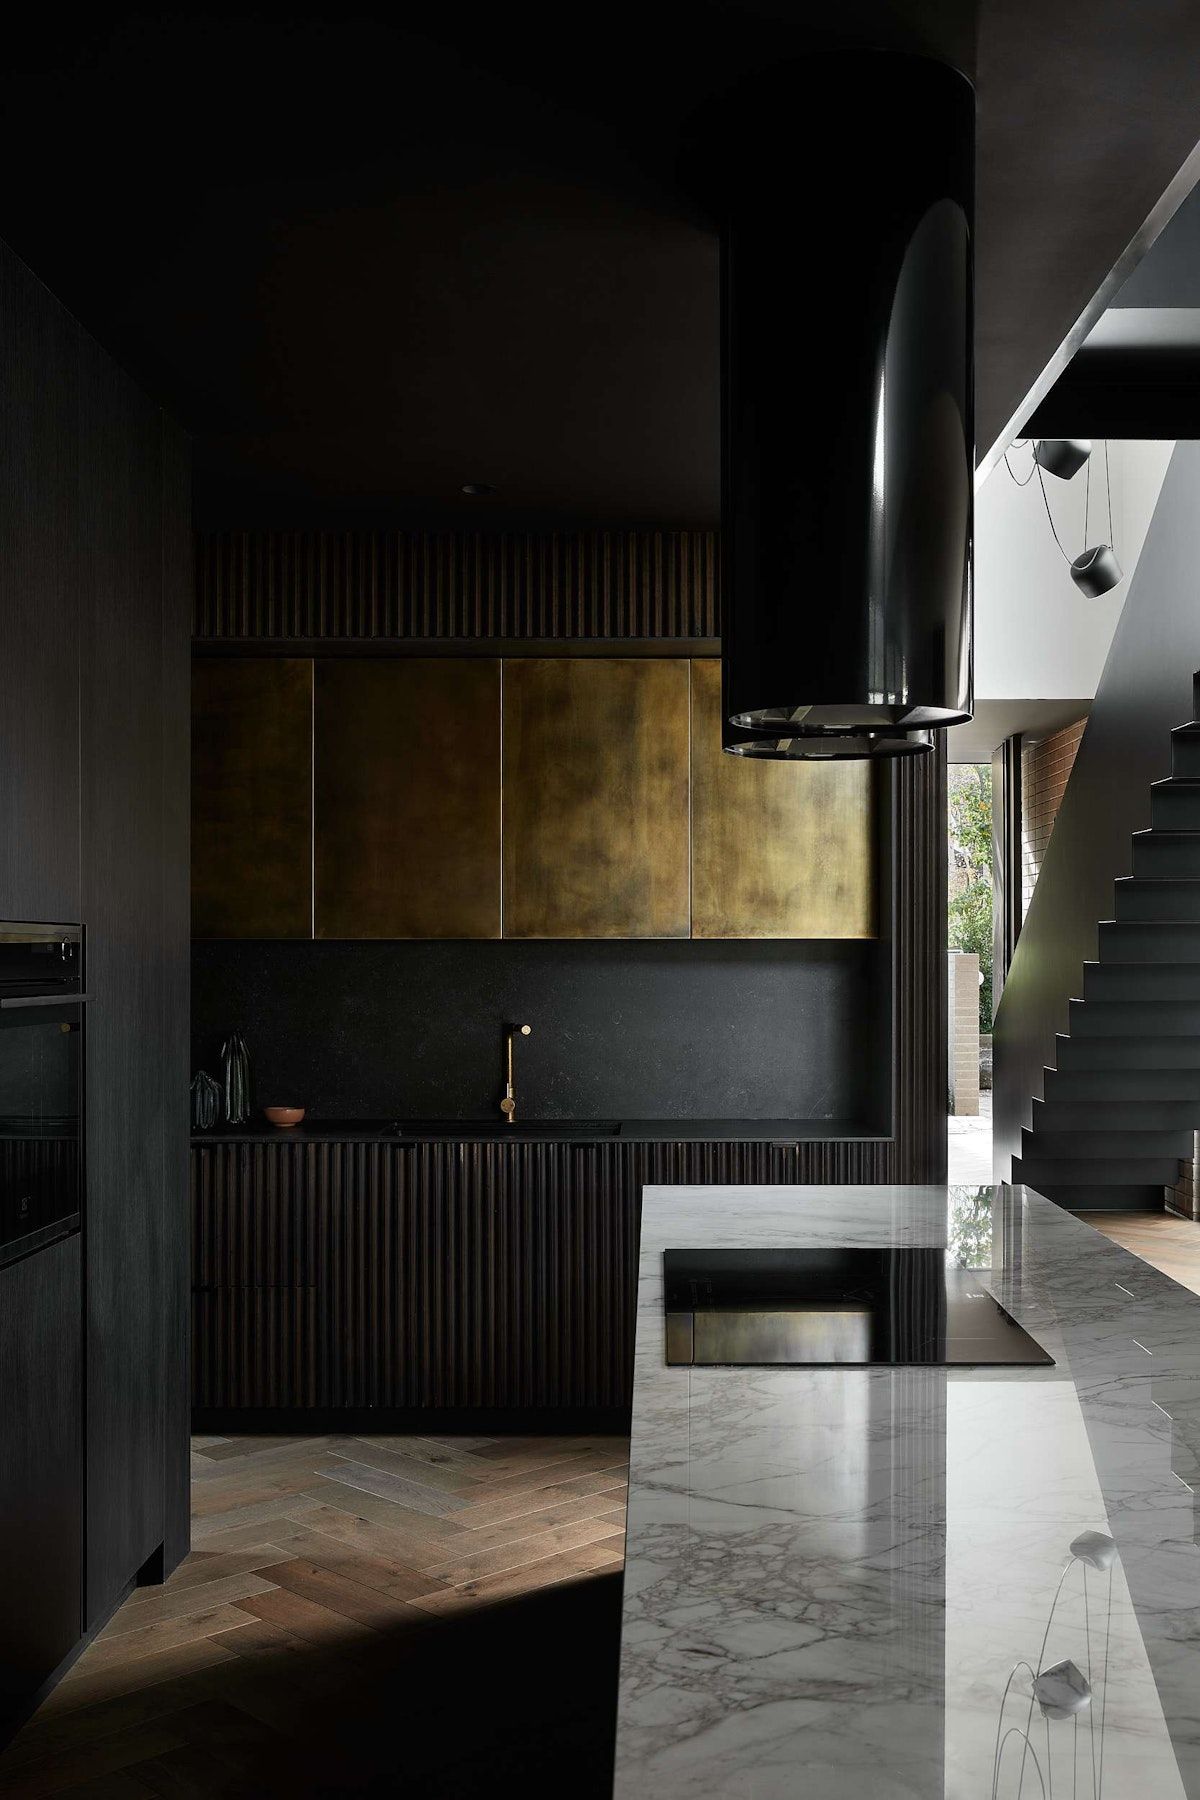 Das Studio interior of a kitchen with brass and marble elements